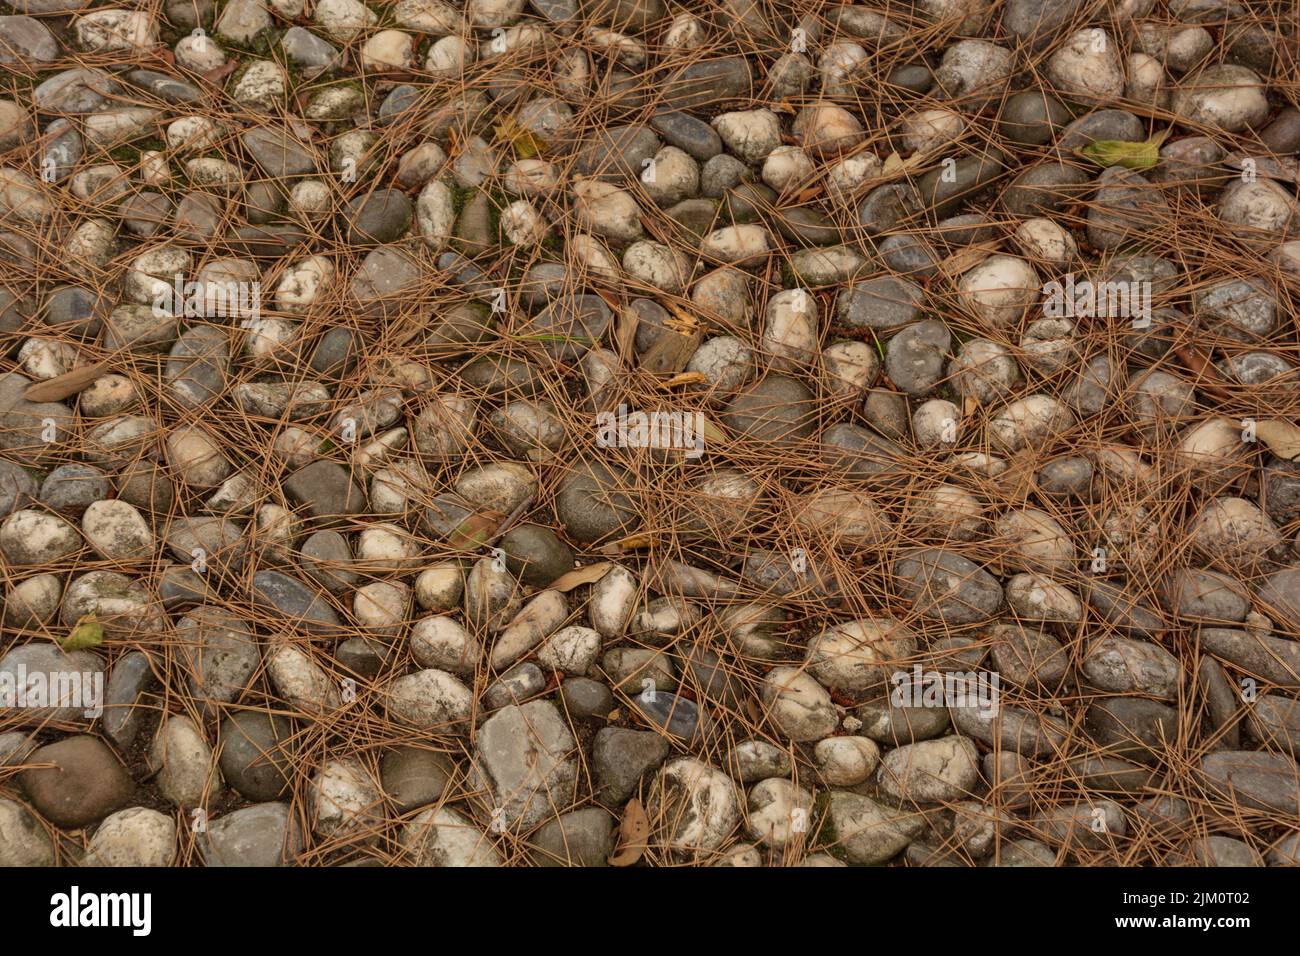 dried pine needles lie on an old uneven cobblestone pavement with small round stones Stock Photo